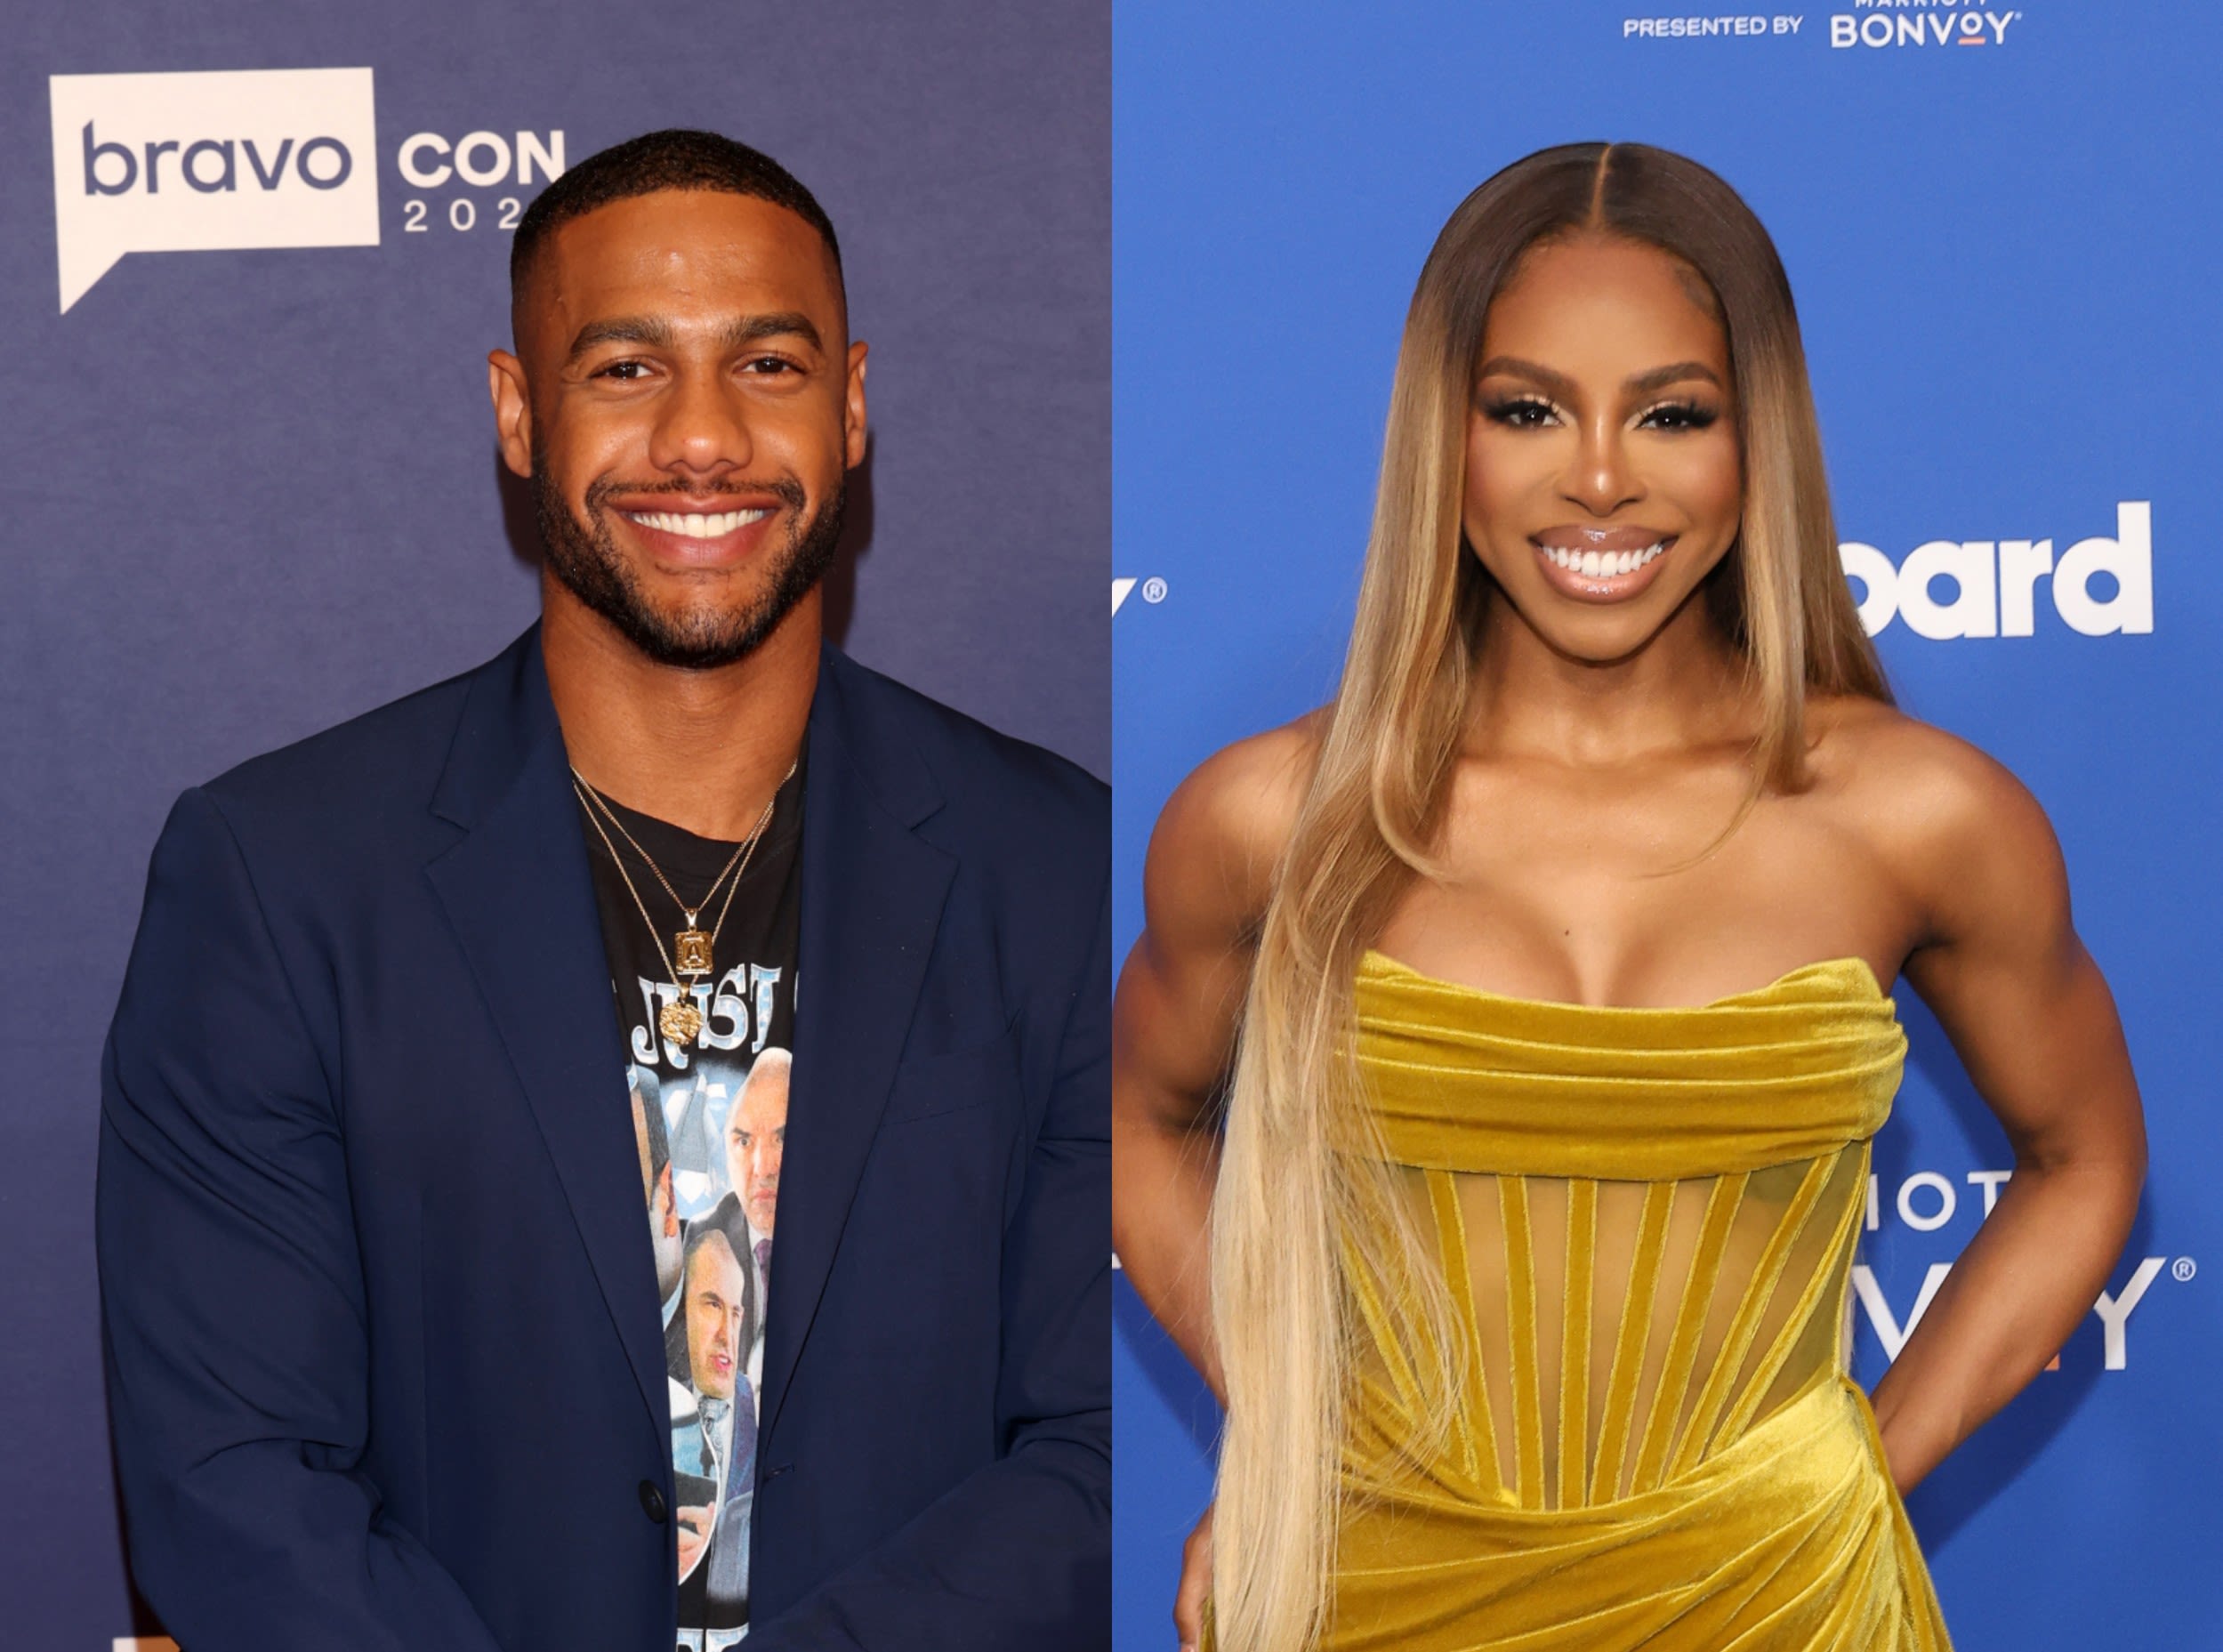 Summer HouseMV: Amir Lancaster Peeped Candiace Dillard's Social Media Shade And Comes To His Girlfriend's Defense